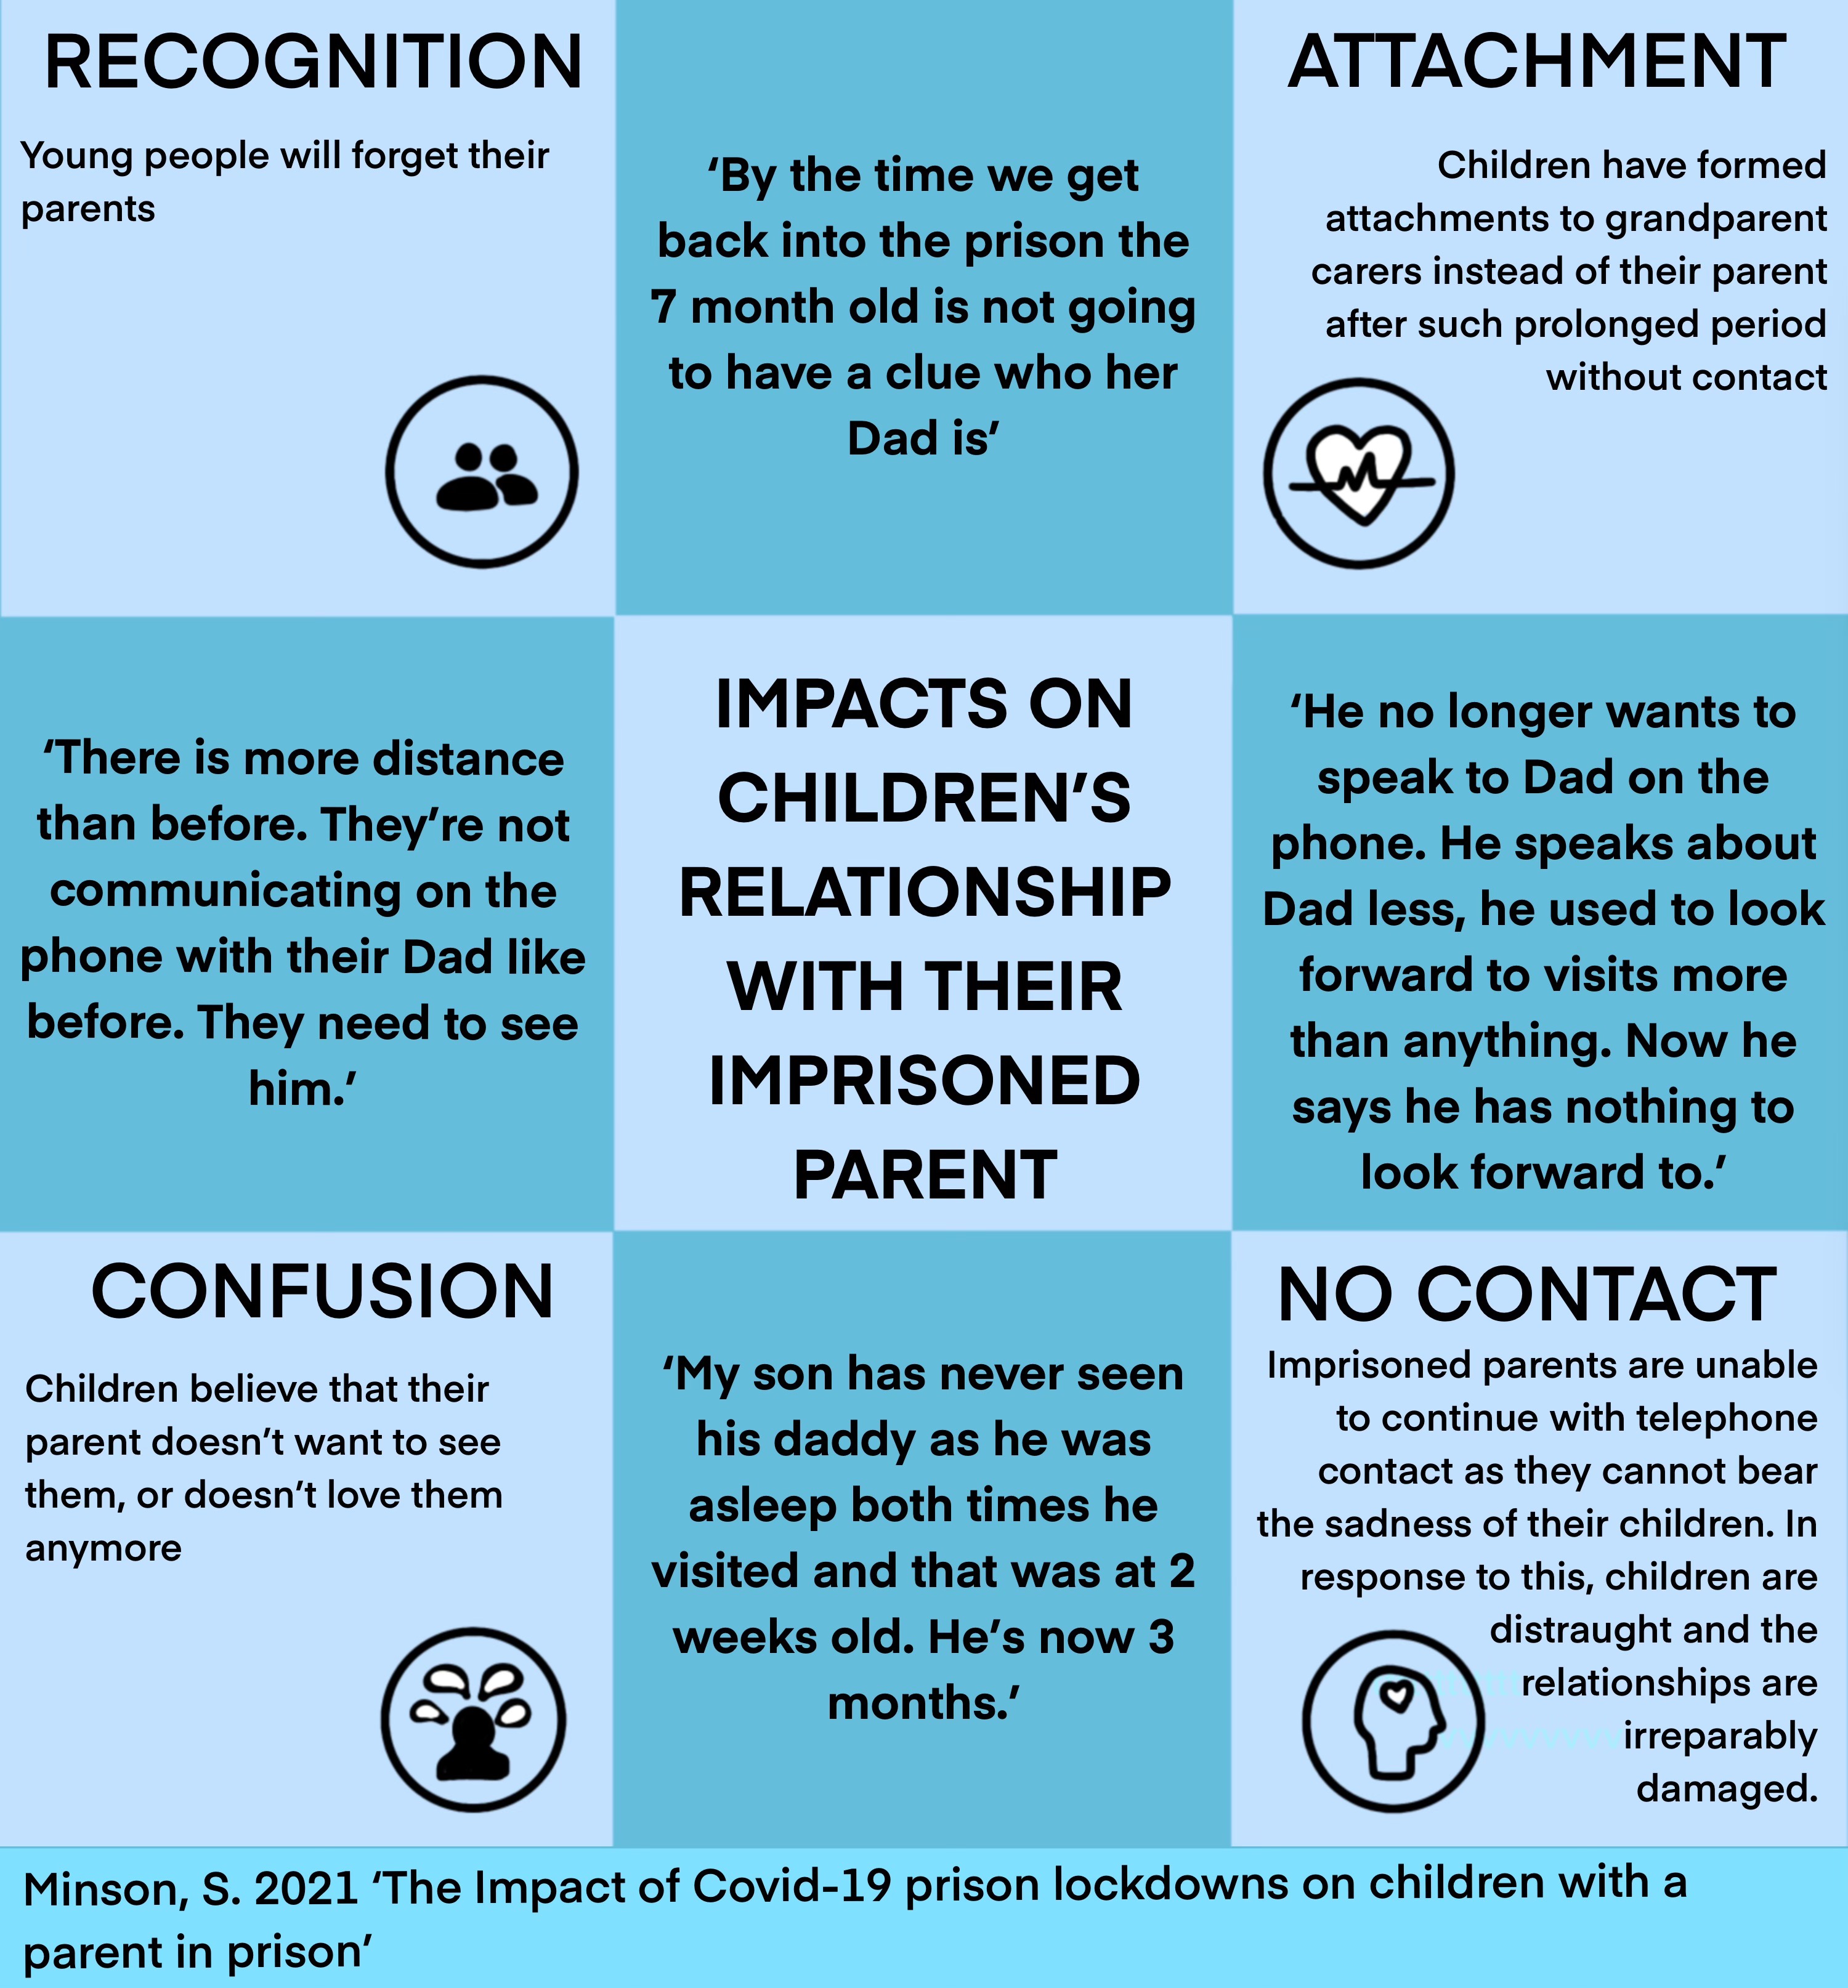 Image showing impacts of COVID on children's relationships with imprisoned parents